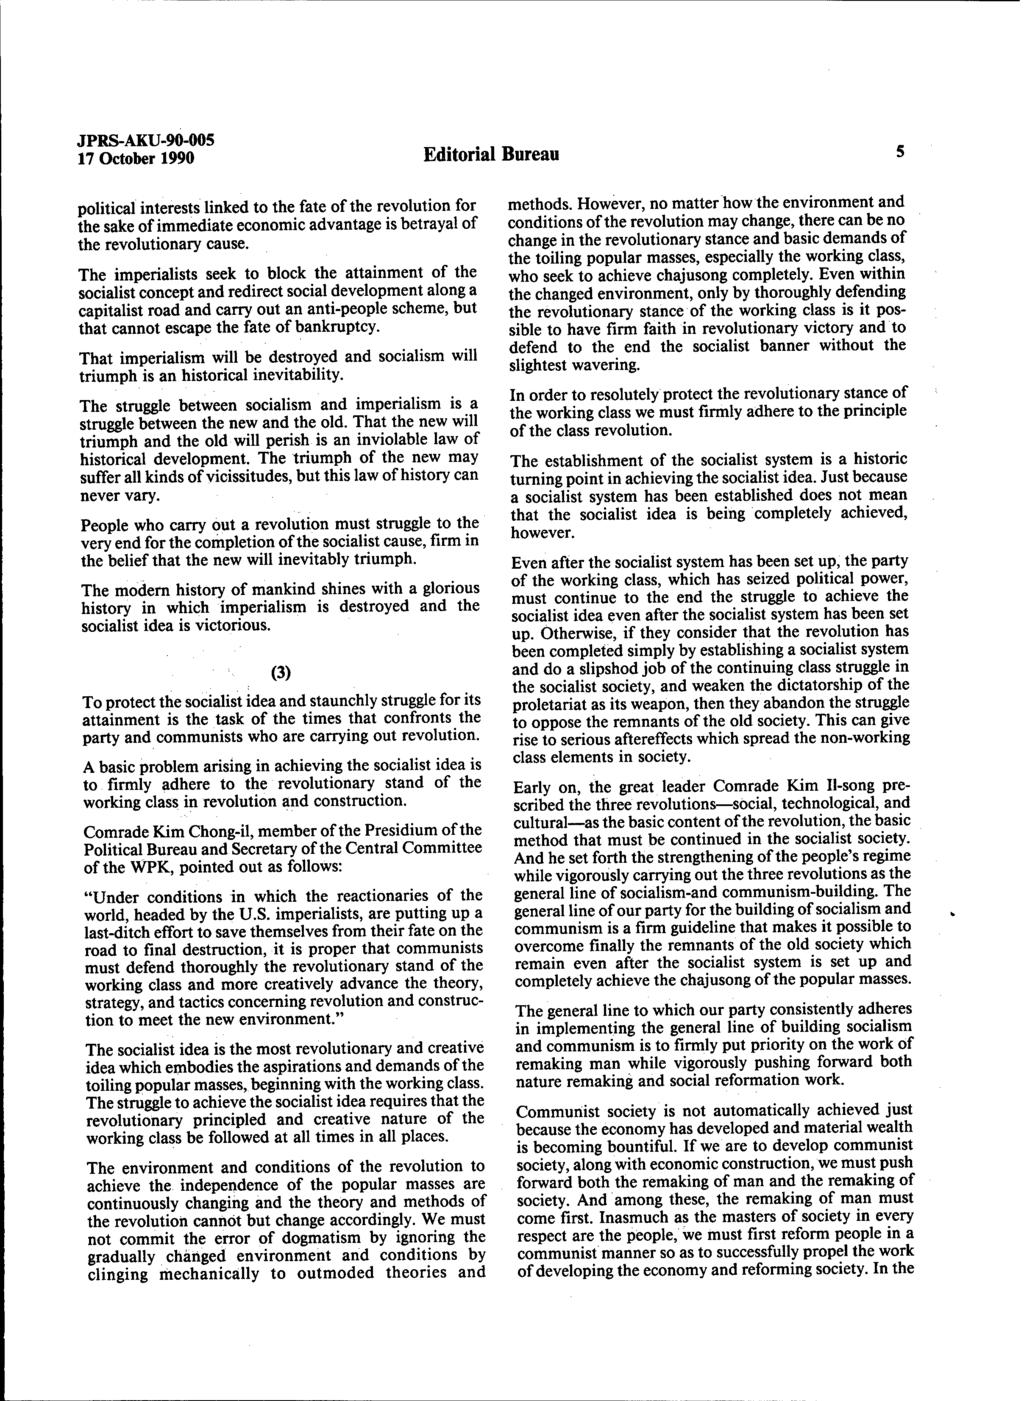 JPRS-AKU-90-005 17 October 1990 Editorial Bureau political interests linked to the fate of the revolution for the sake of immediate economic advantage is betrayal of the revolutionary cause.